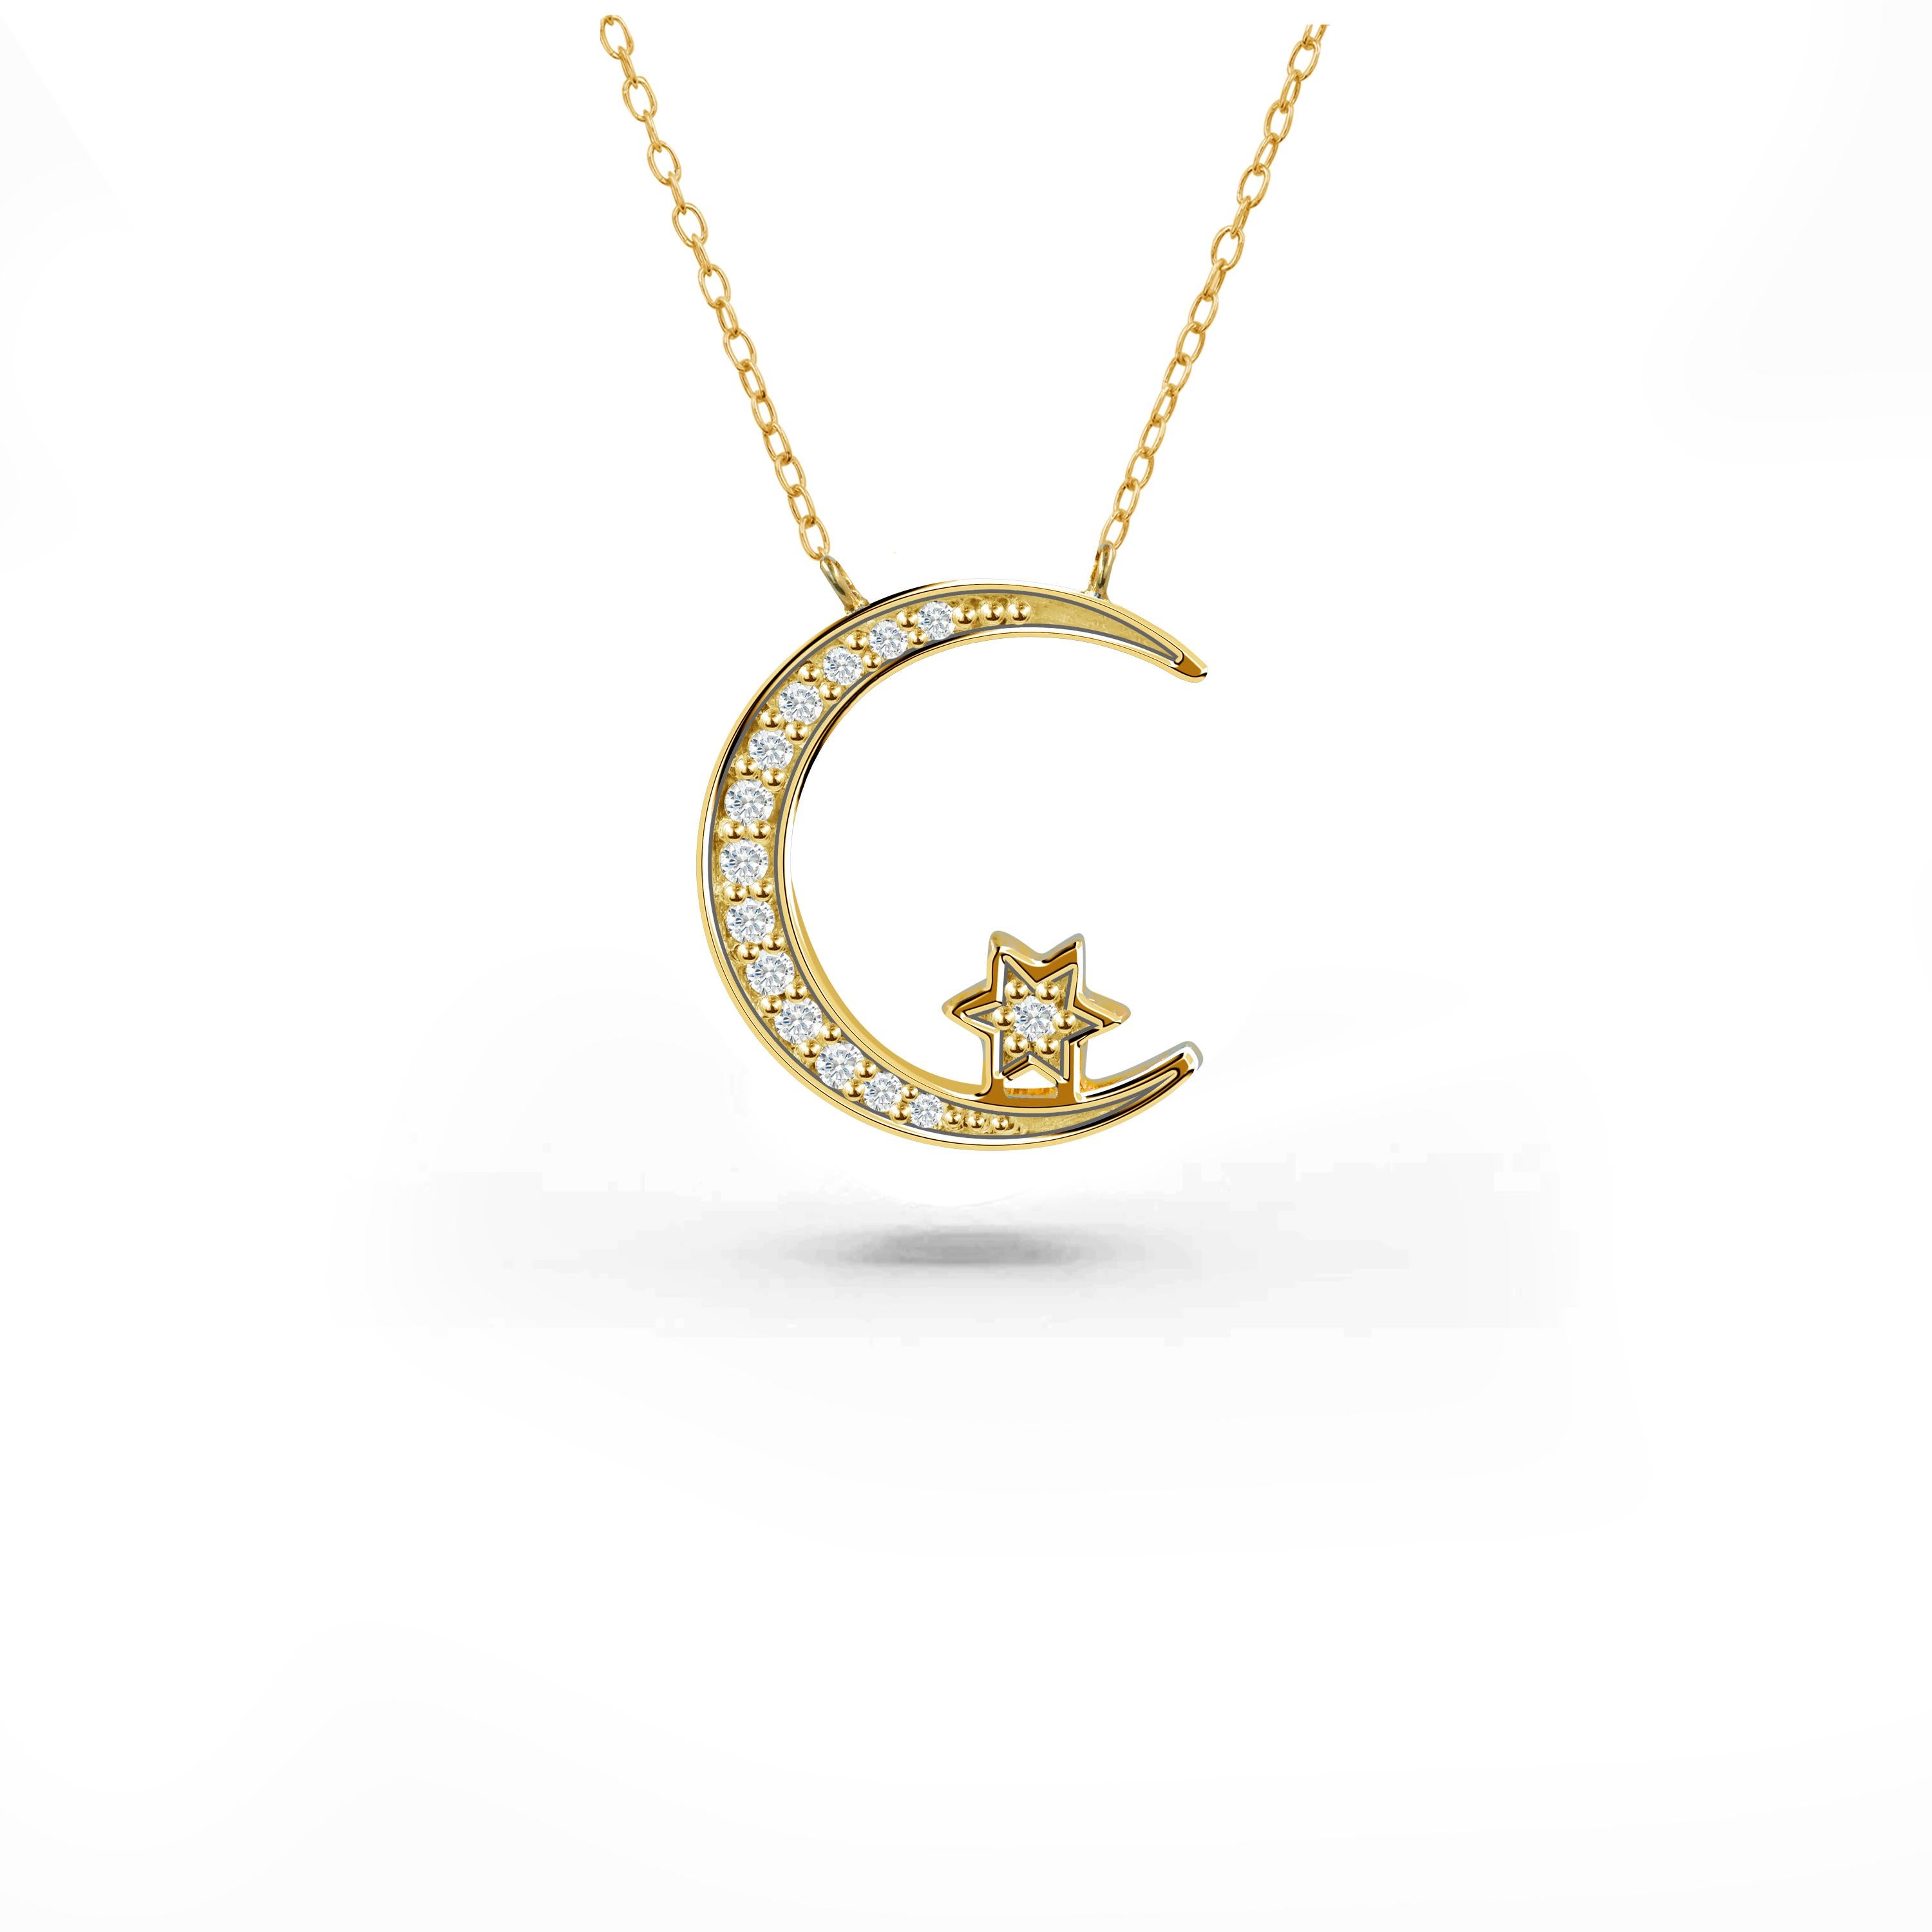 The handcrafted Islamic crescent moon diamond necklace is perfect for everyday wear to bring inner peace and spirituality. This beautiful crescent moon star religious necklace can guarantee top-notch quality with 0.11 carat diamonds which gives us a